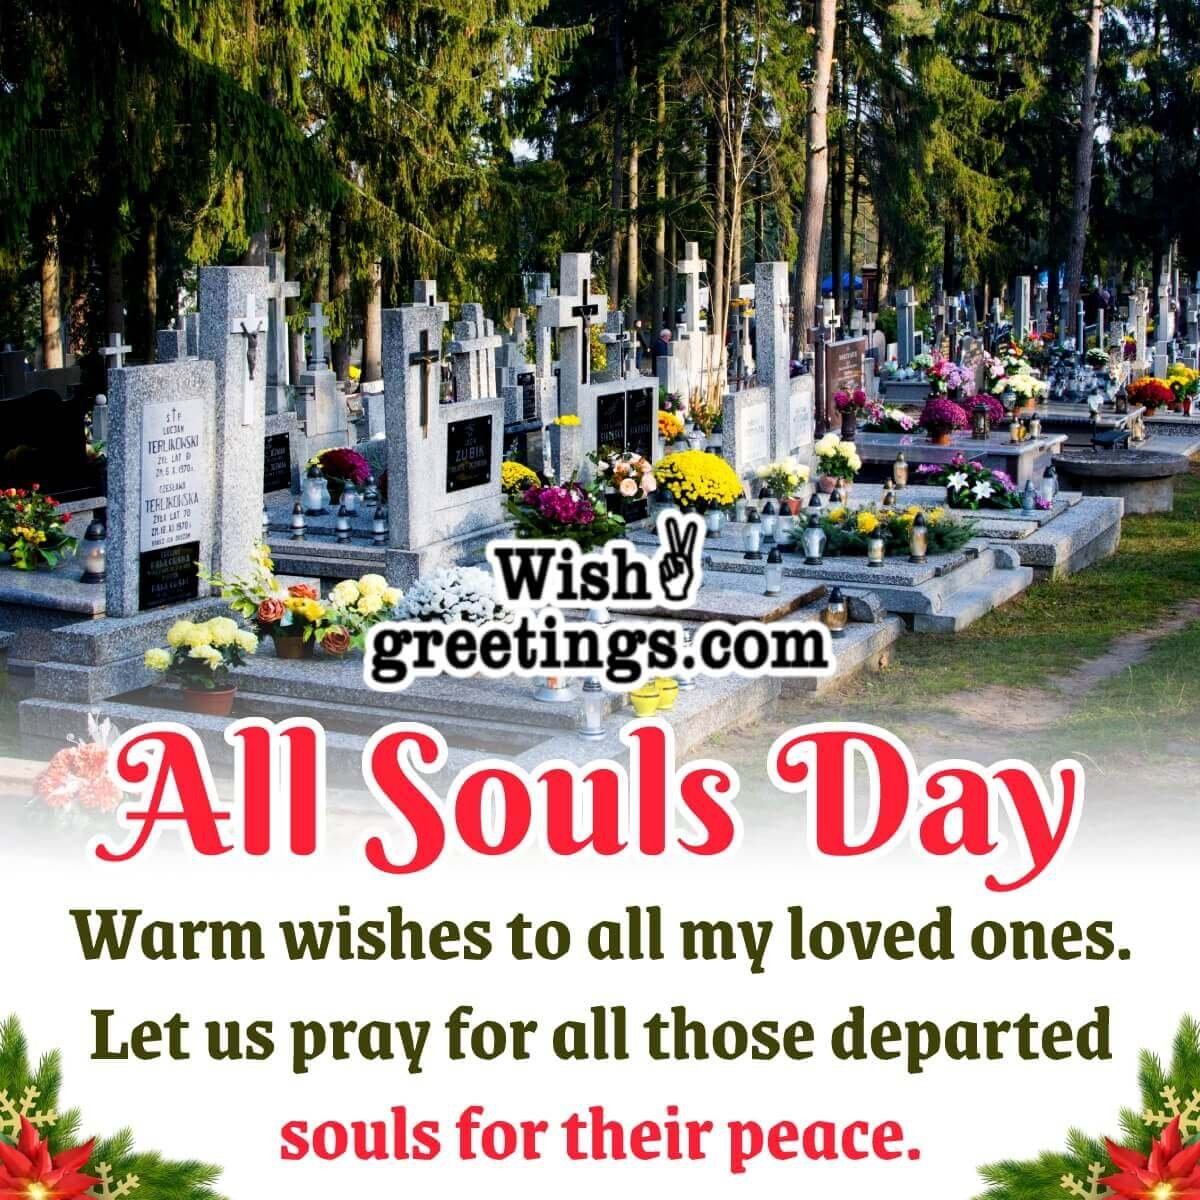 all-souls-day-2021-wishes-greetings-messages-hd-images-and-quotes